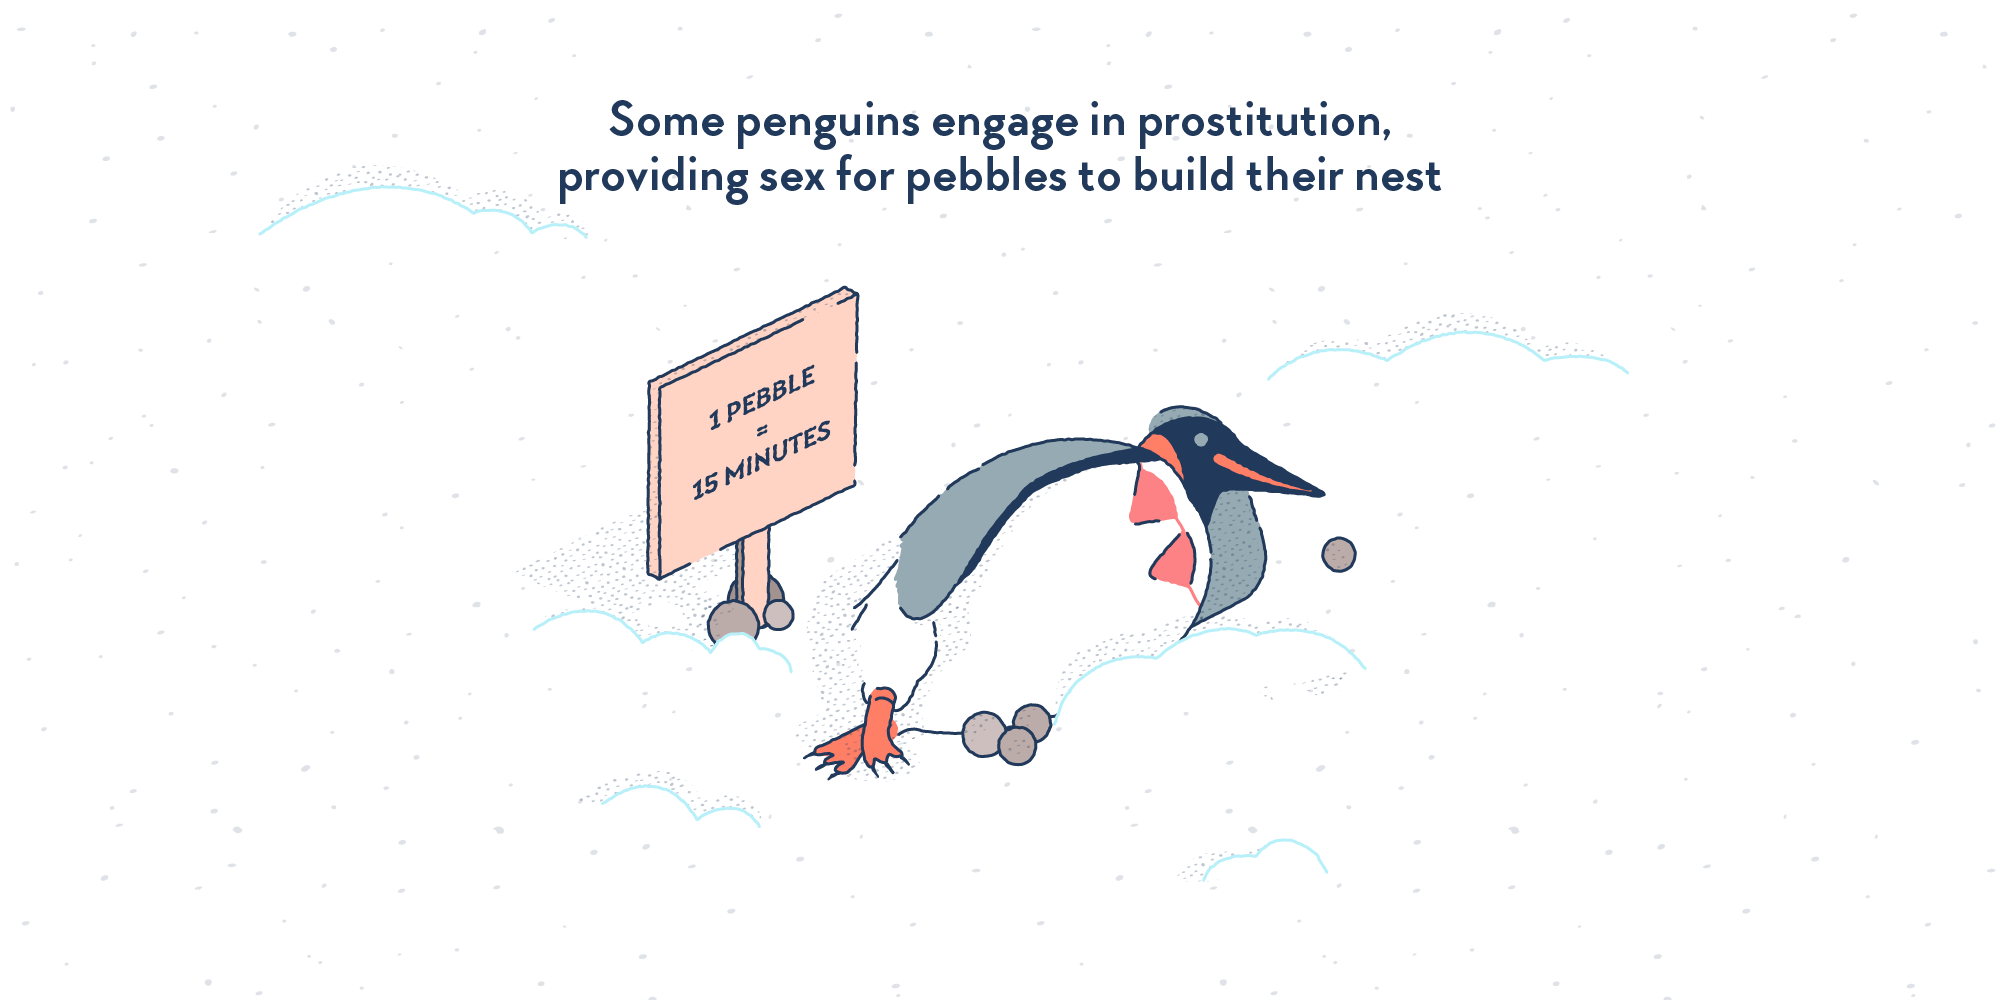 A penguin wearing lingerie and lying down flirtatiously next to a sign reading “1 pebble = 15 minutes”.